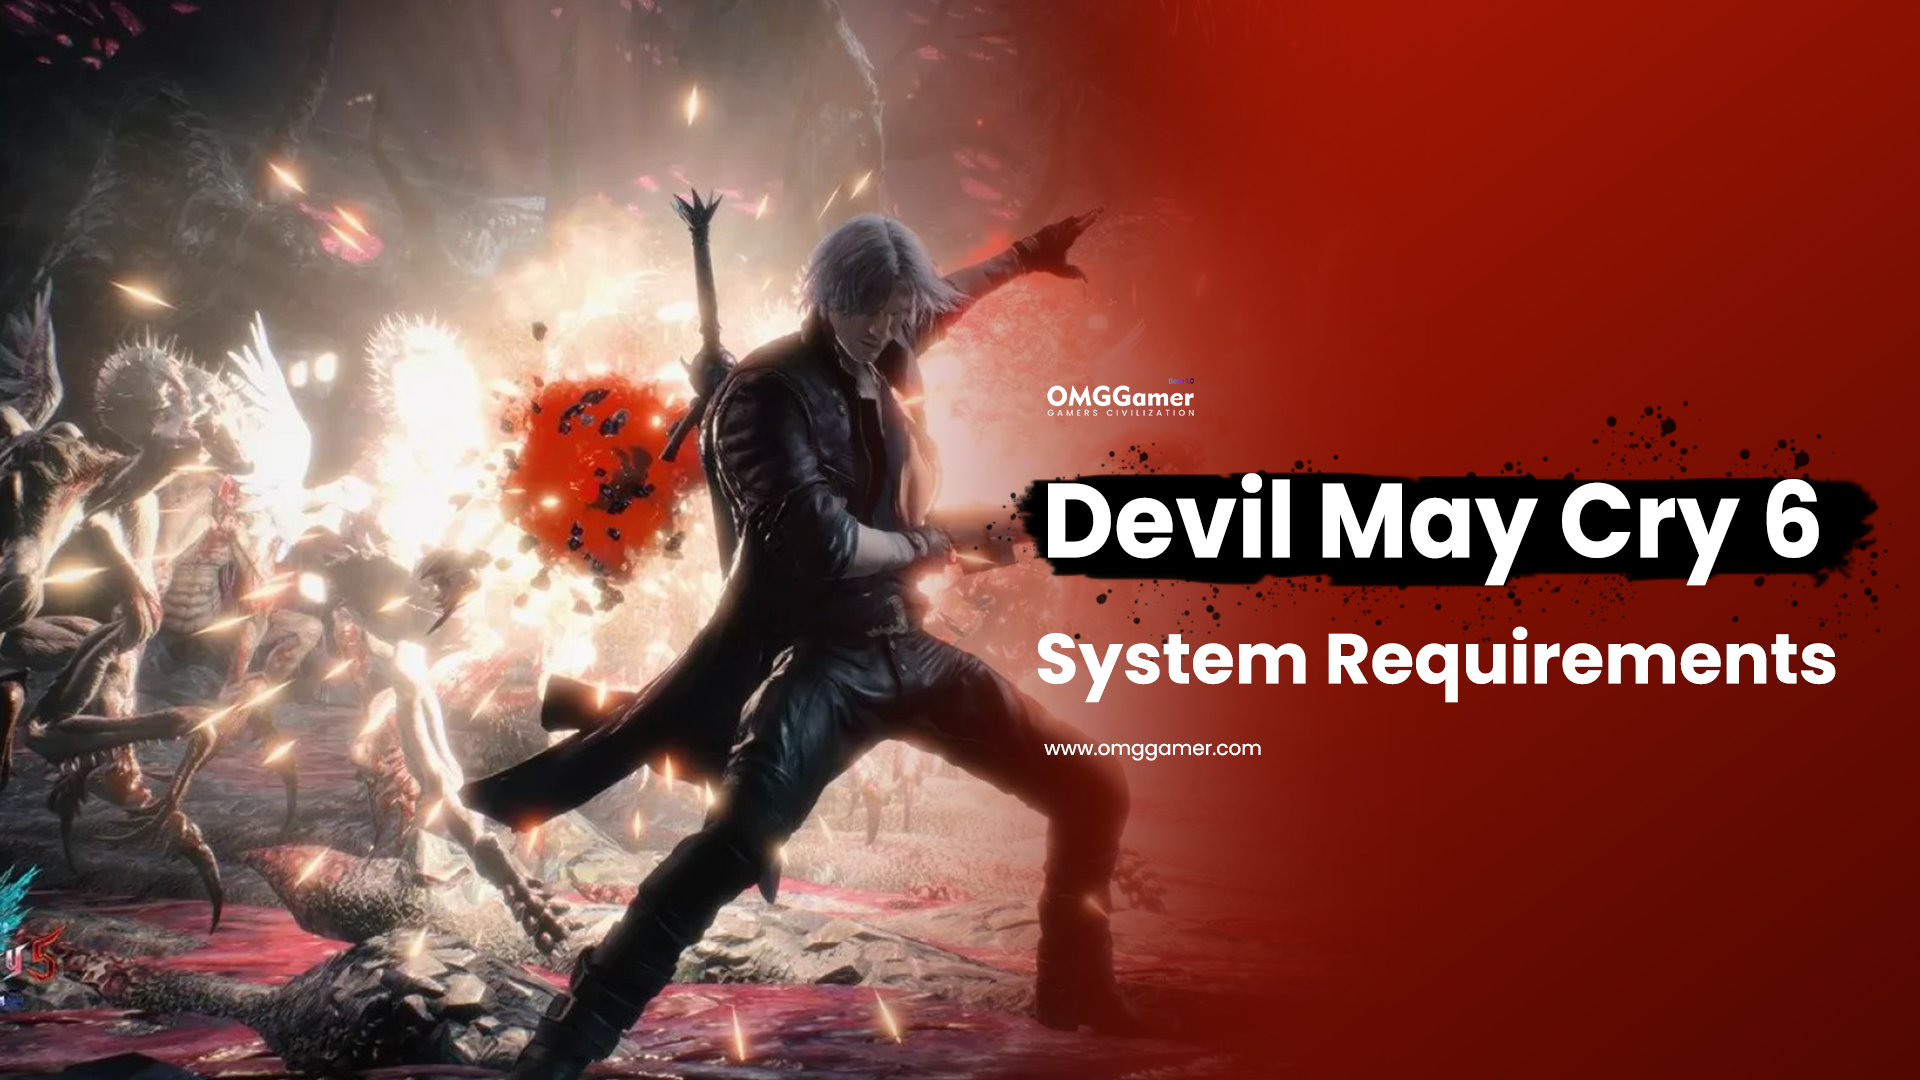 Devil May Cry 6 System Requirements